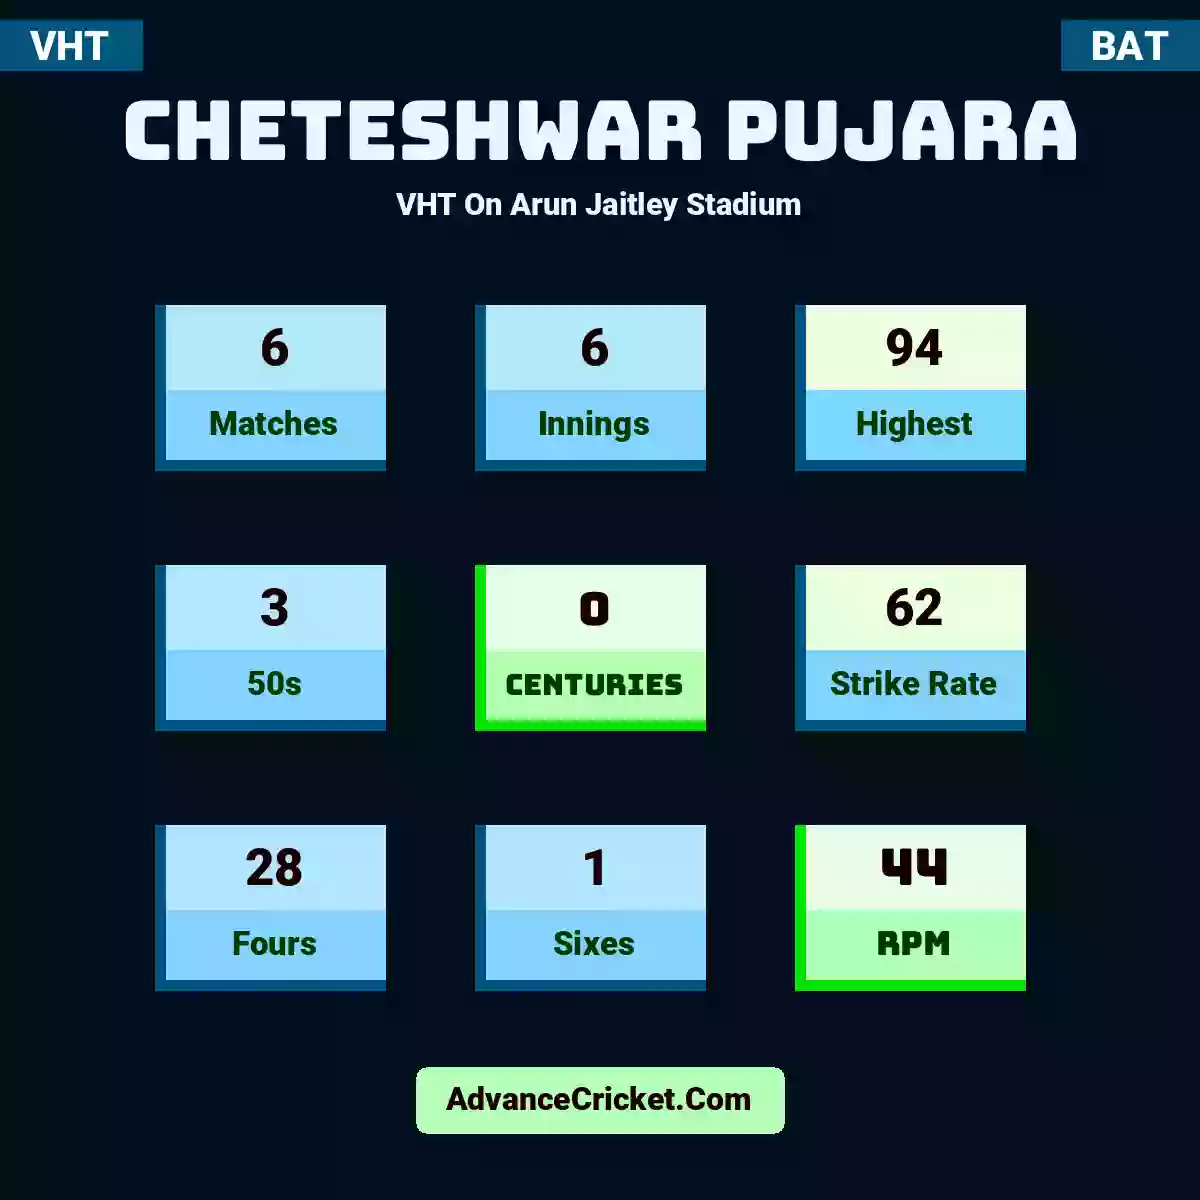 Cheteshwar Pujara VHT  On Arun Jaitley Stadium, Cheteshwar Pujara played 6 matches, scored 94 runs as highest, 3 half-centuries, and 0 centuries, with a strike rate of 62. C.Pujara hit 28 fours and 1 sixes, with an RPM of 44.